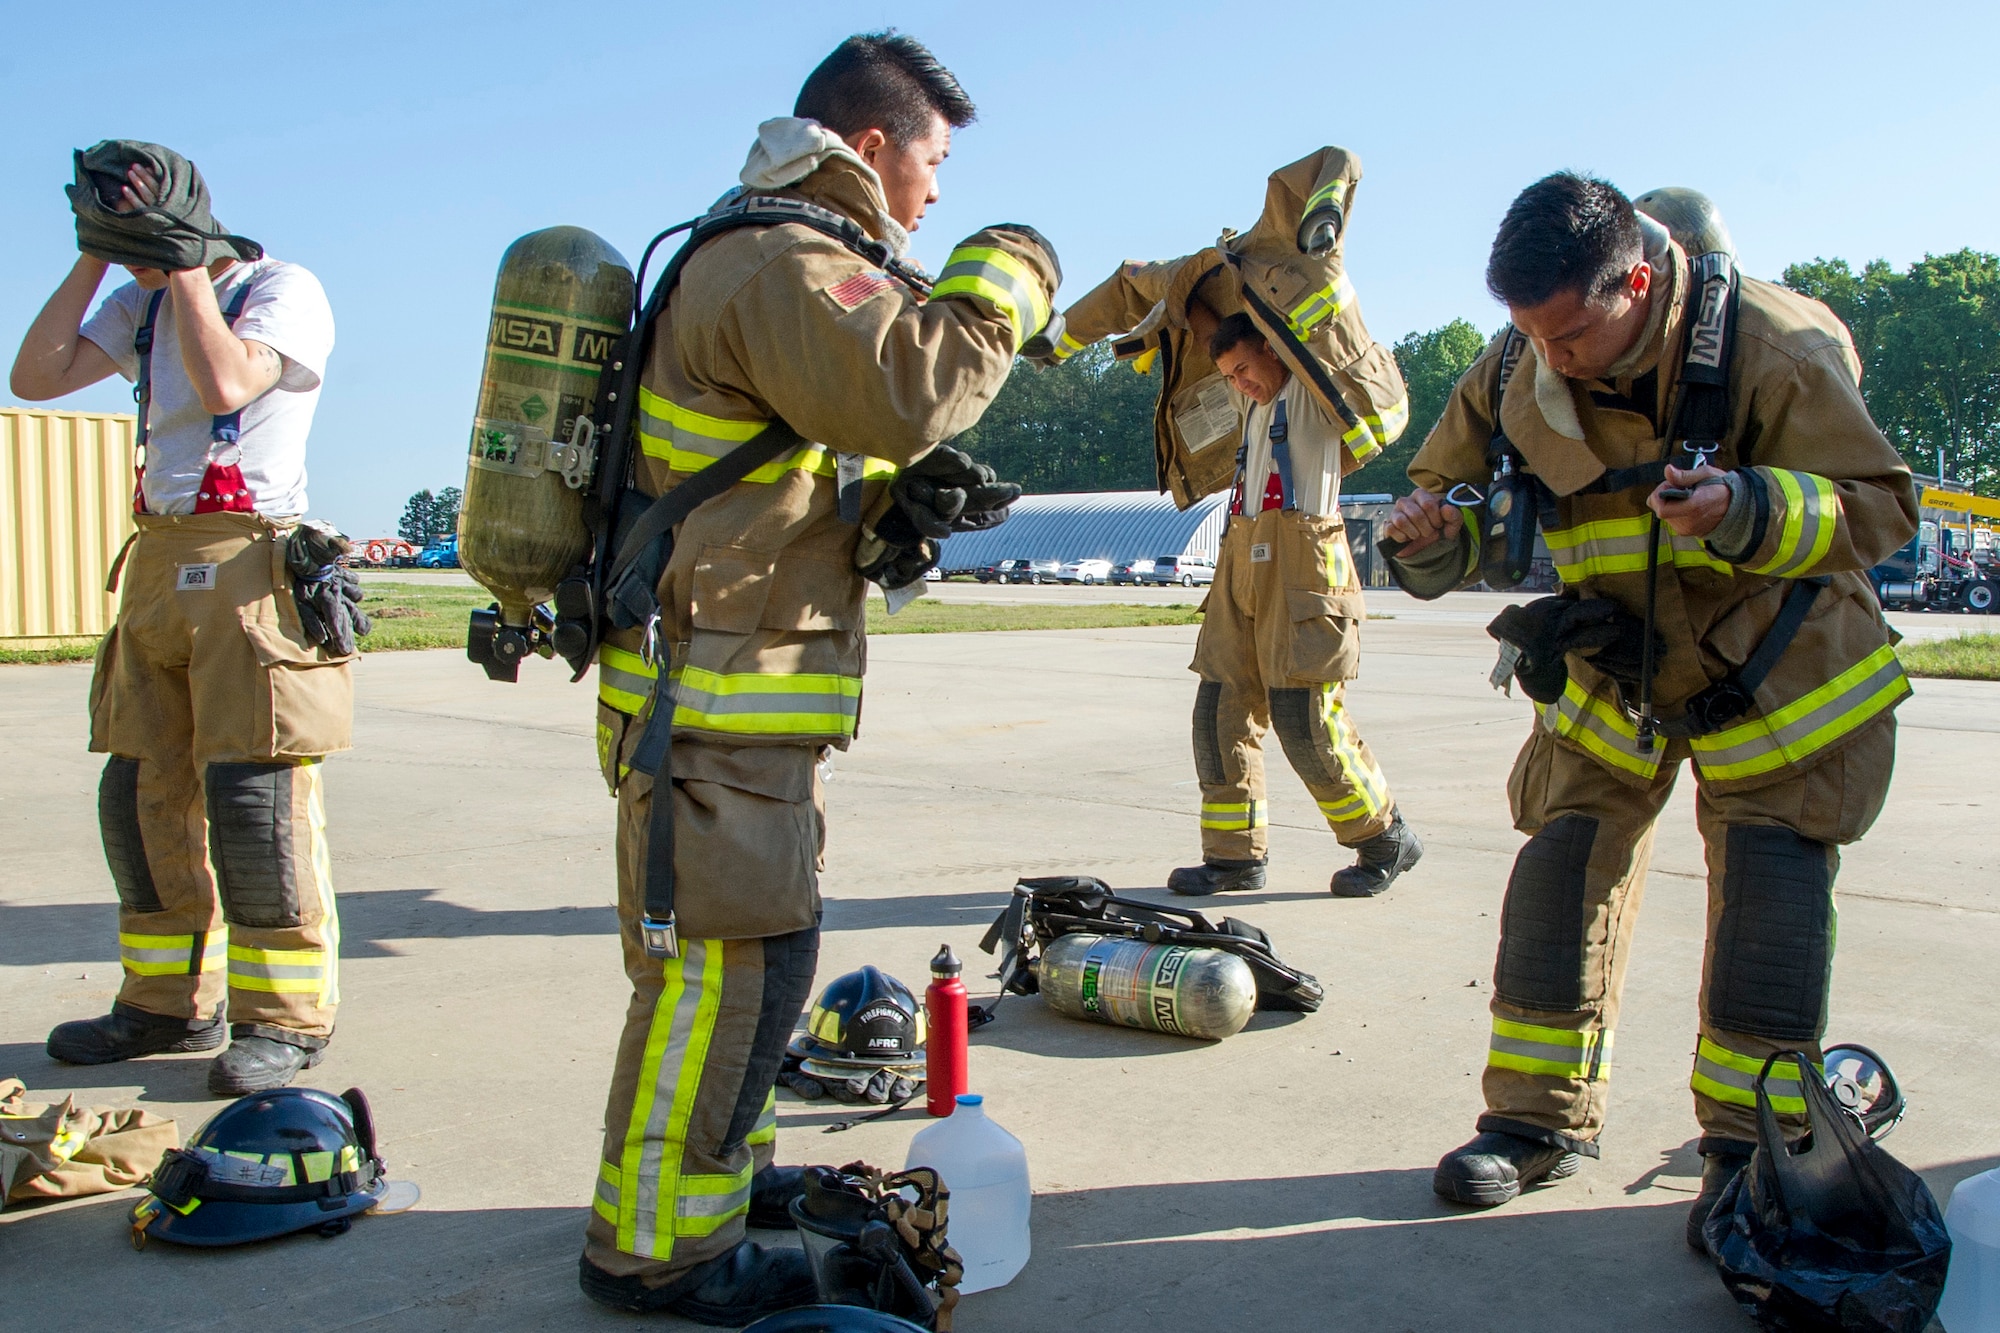 A team of Air Force Reserve firefighters prepare for a training scenario during the first-ever Air Force Reserve Command Firefighter Rescue and Survival Course at Dobbins Air Reserve Base, Ga., April 18, 2017. Twenty Citizen Airmen participated in the intense 50-hour course held at the 622nd Civil Engineer Group expeditionary combat support-training certification center, which focused on a Rapid Intervention Crew, or RIC. The RIC is a dedicated and specially trained group of firefighters whose responsibilities include safely evacuating a distressed firefighter from a structure. (U.S. Air Force photo by Master Sgt. Theanne K. Herrmann)